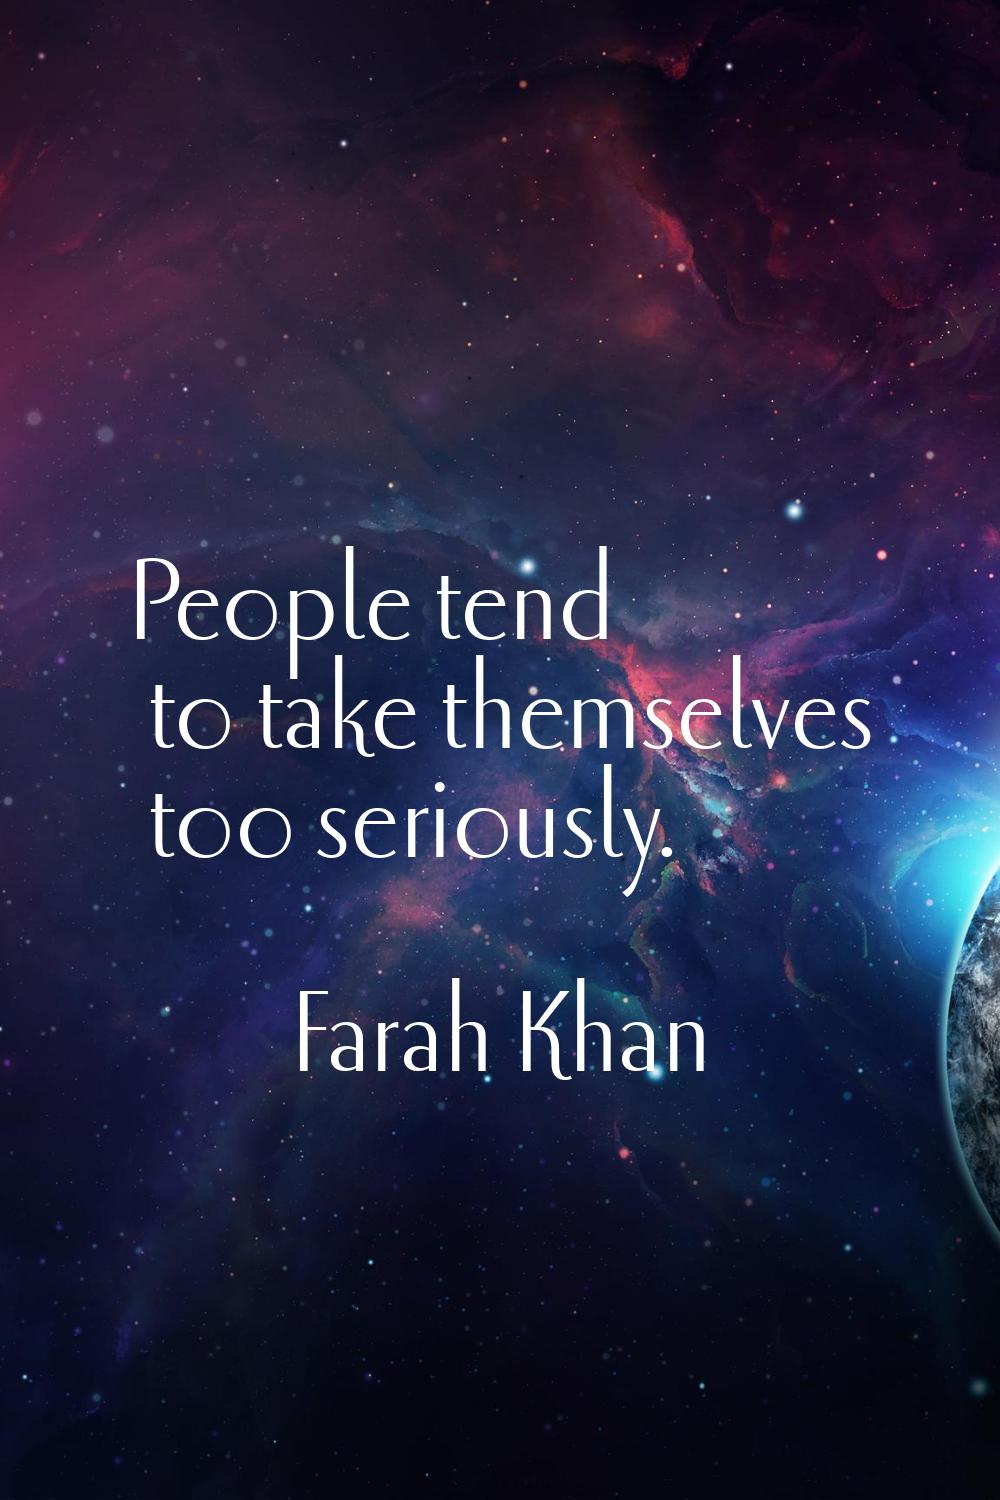 People tend to take themselves too seriously.